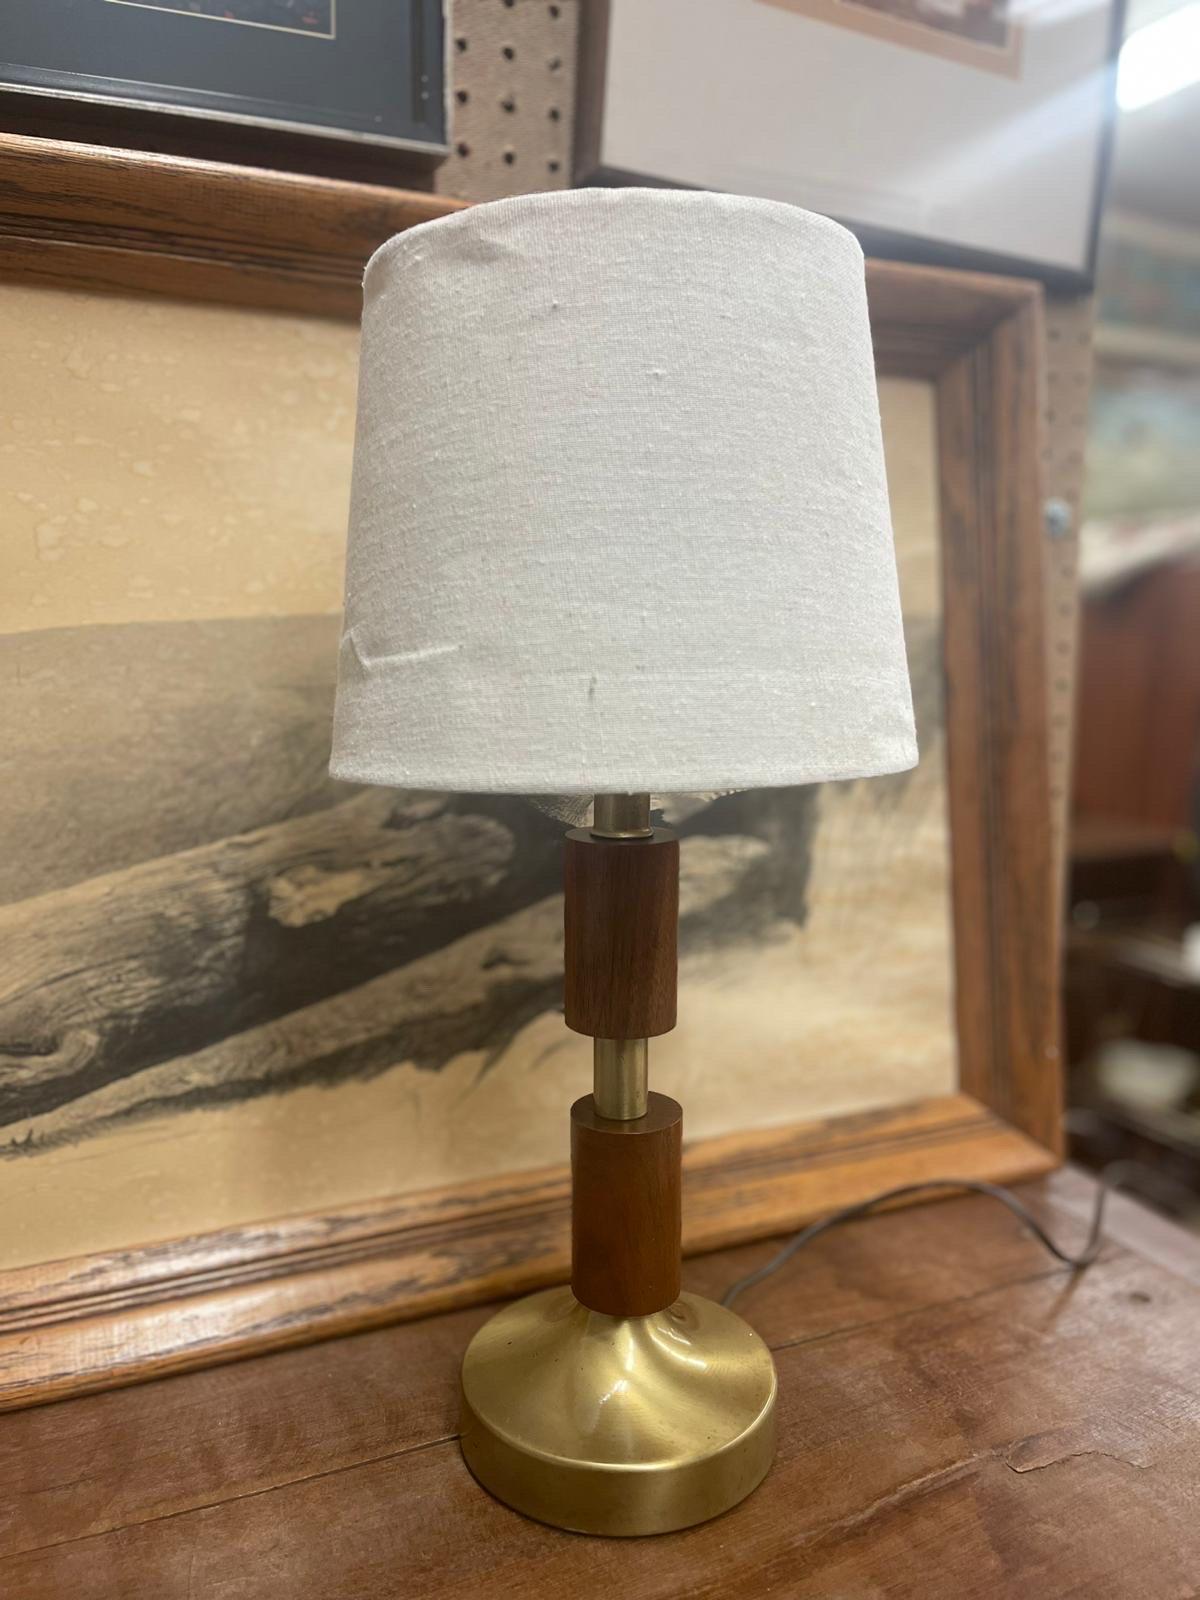 Beautiful Vintage Table Lamp with Walnut Toned Wood Accents and Brass Tone Base. Light Bulb not Included. Oatmeal Toned Lamp Shade Included . Vintage Condition Consistent with Age as Pictured.

Dimensions. 12 Diameter; 17 H